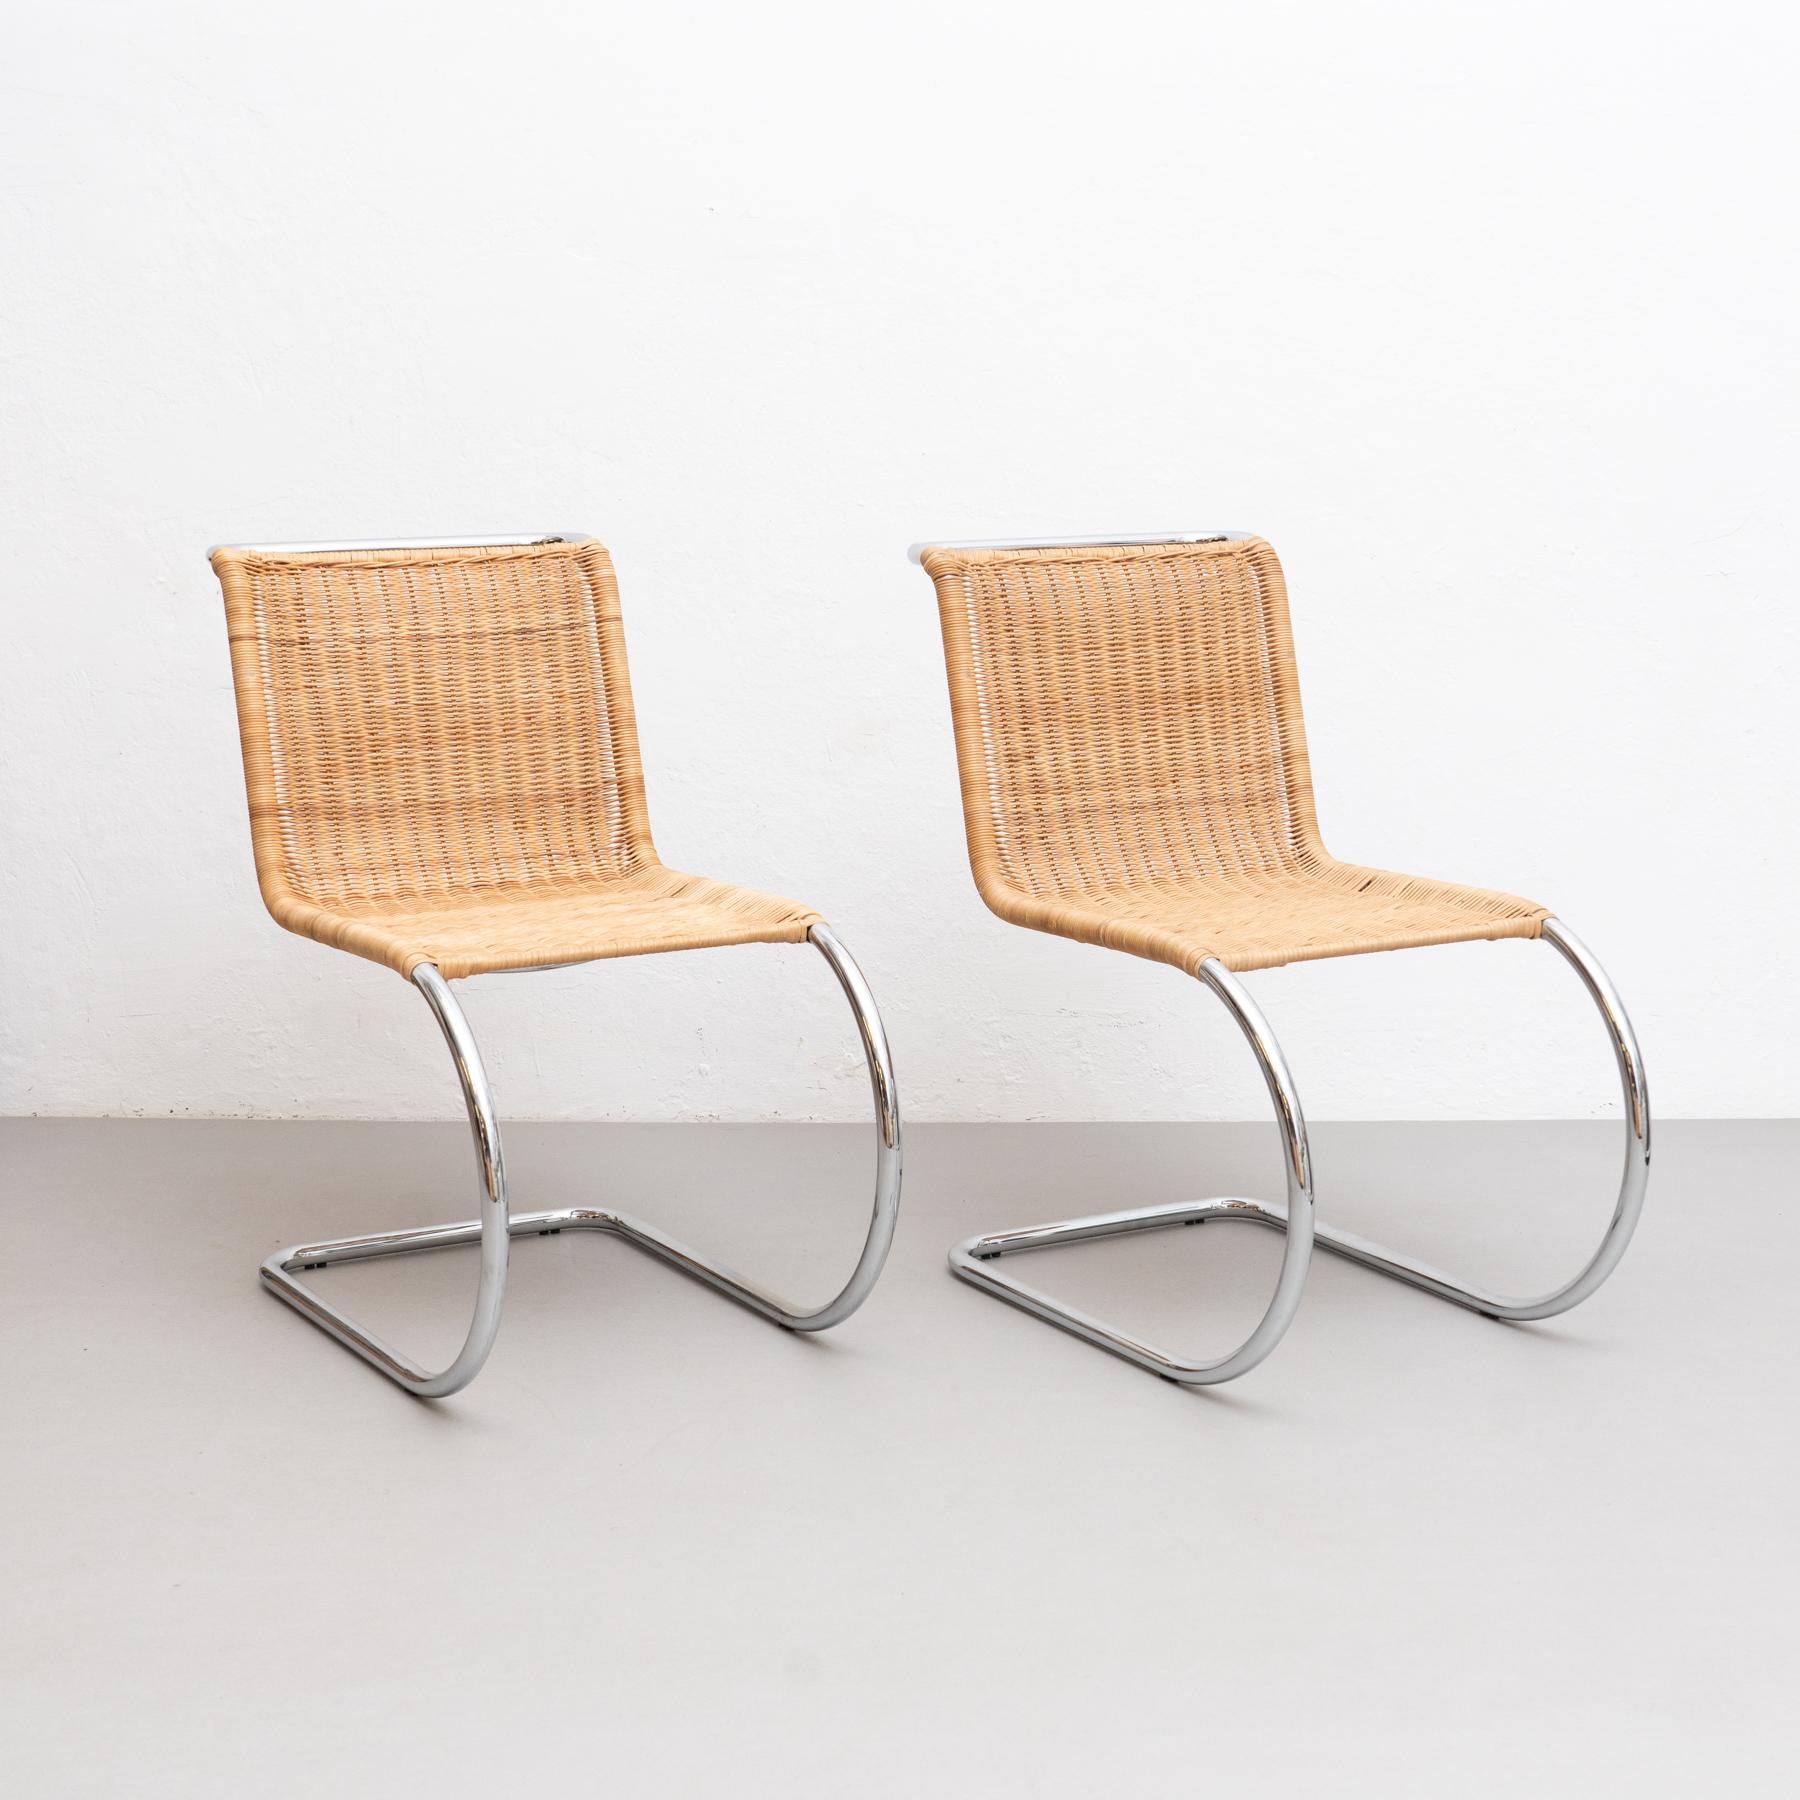 Set of 2 MR10 chairs designed by Ludwig Mies van der Rohe in 1927.
Manufactured by Unknown manufacturer circa 1960. Germany

Inspired by the chairs of Marcel Breuer, Ludwig Mies van der Rohe replaced the right angles on the front legs with a